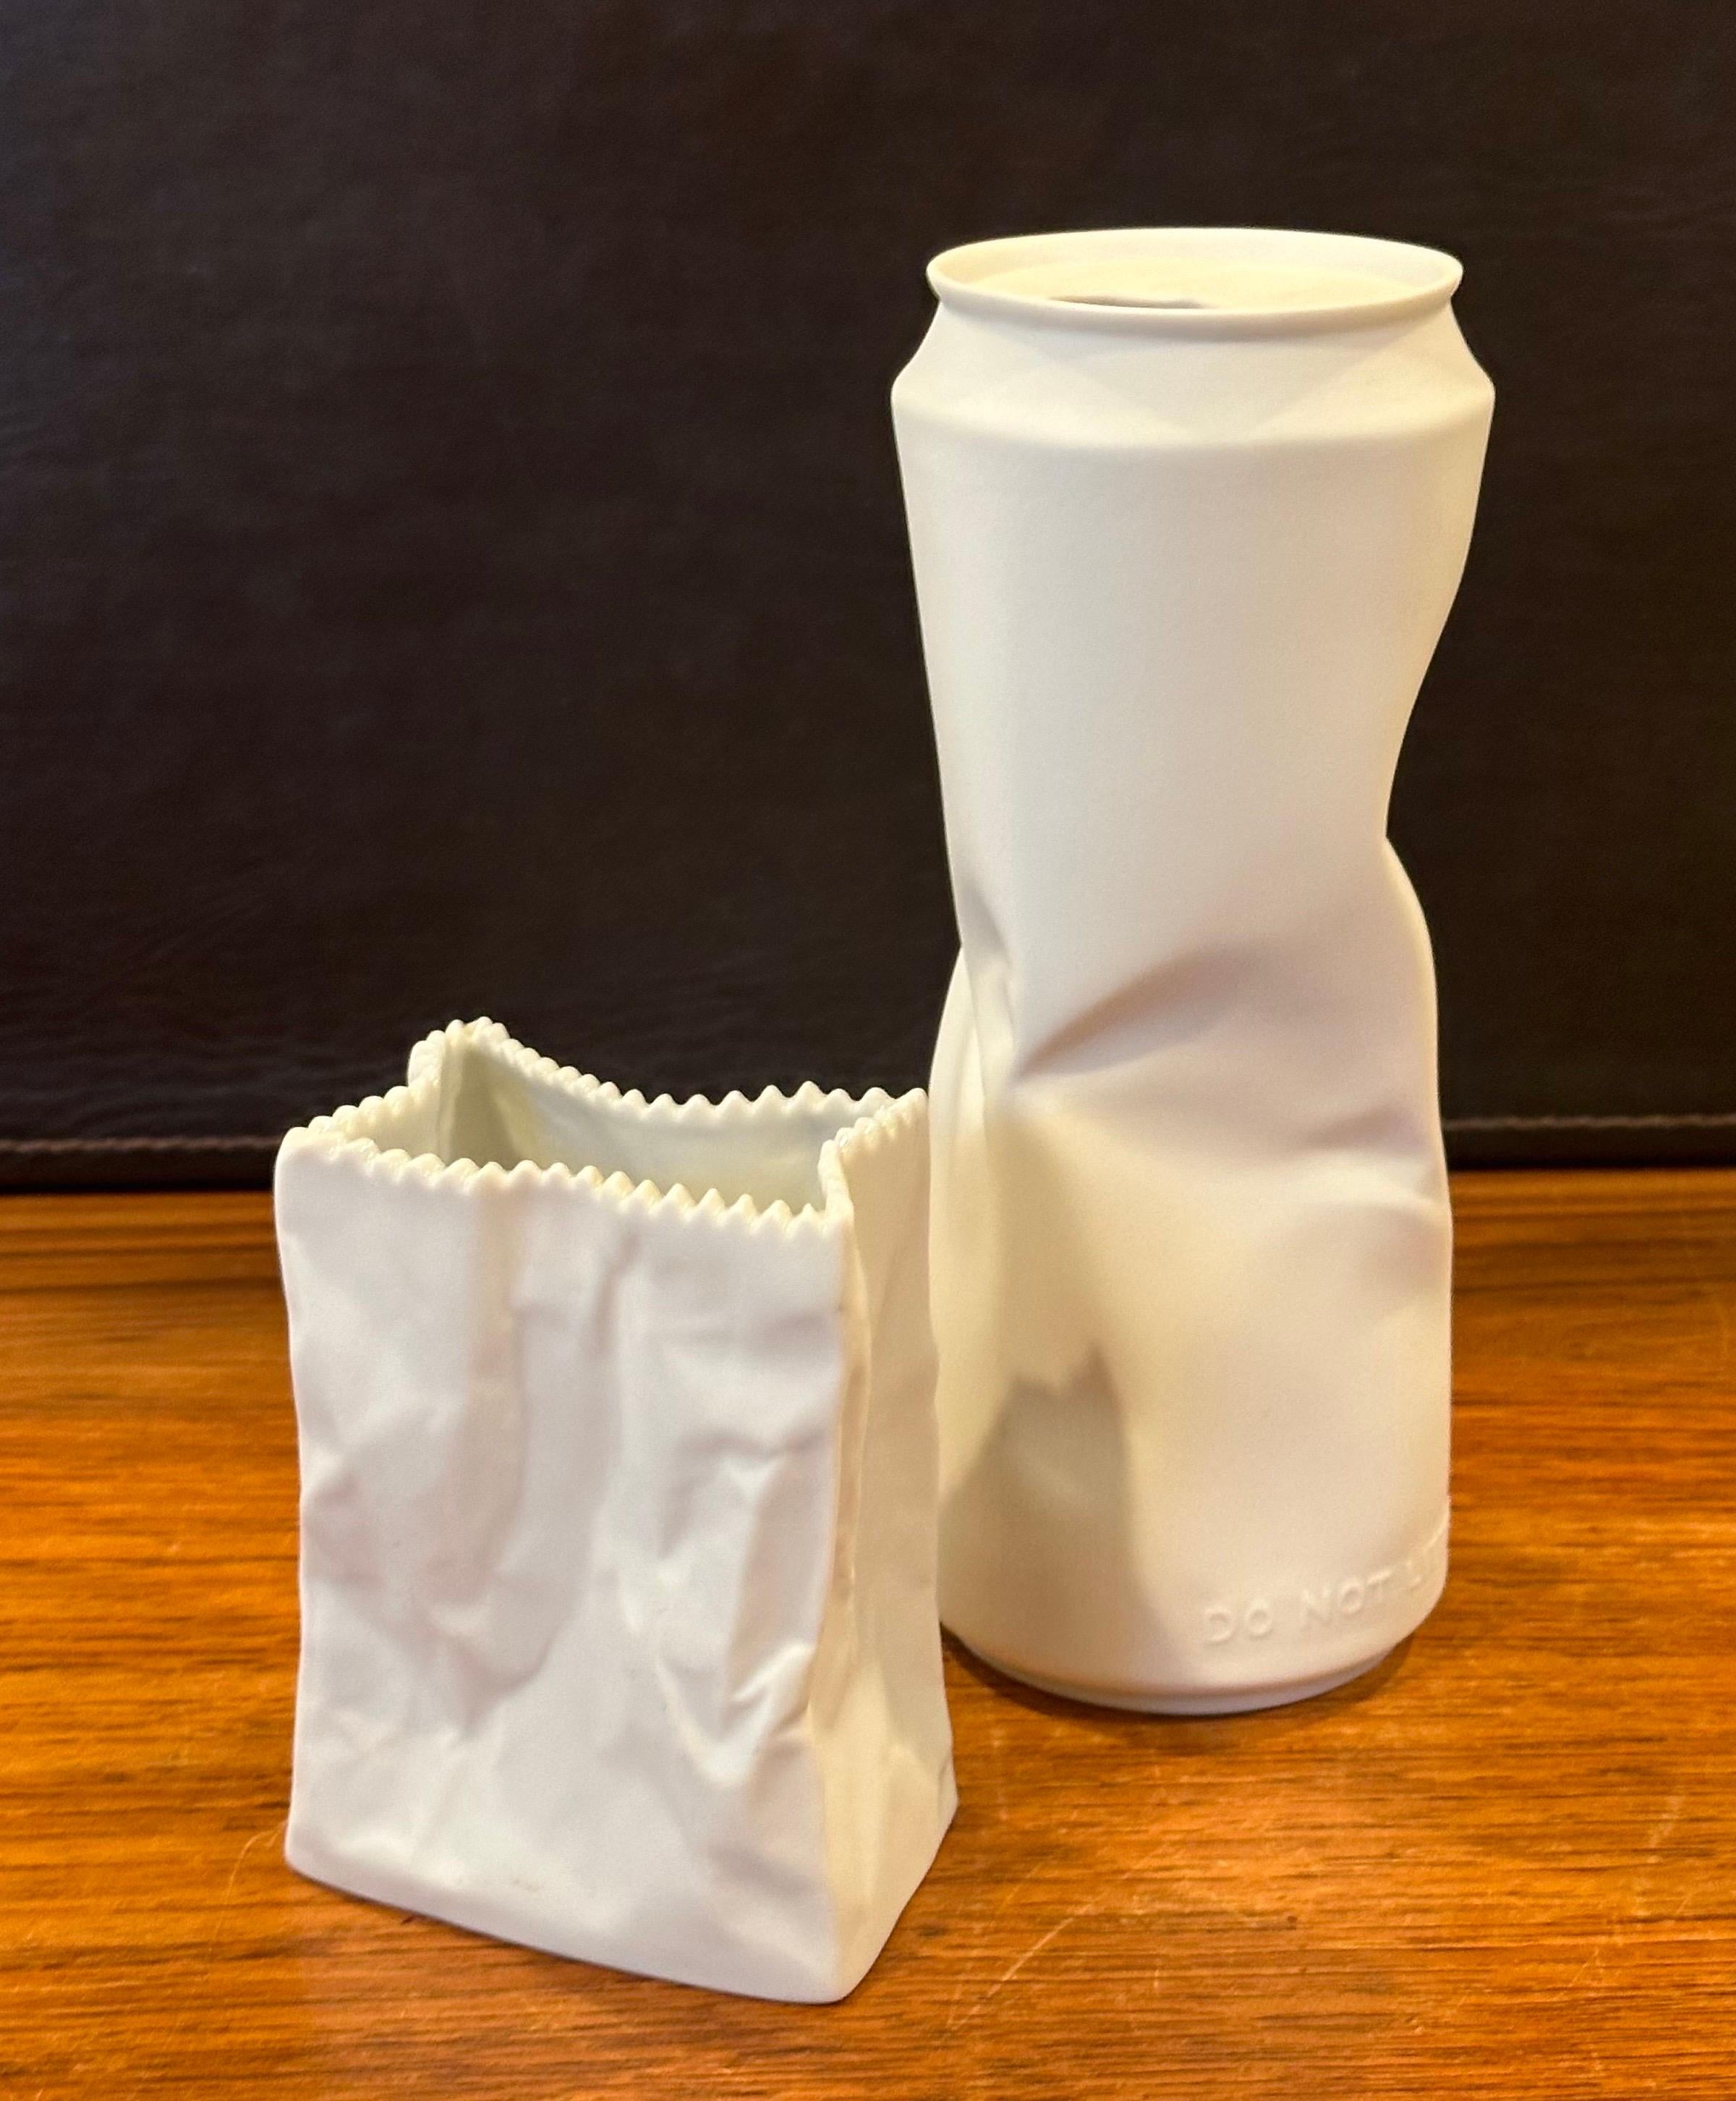 20th Century Bisque Porcelain Can & Paper Bag Vases by Rosenthal Studio-Line 